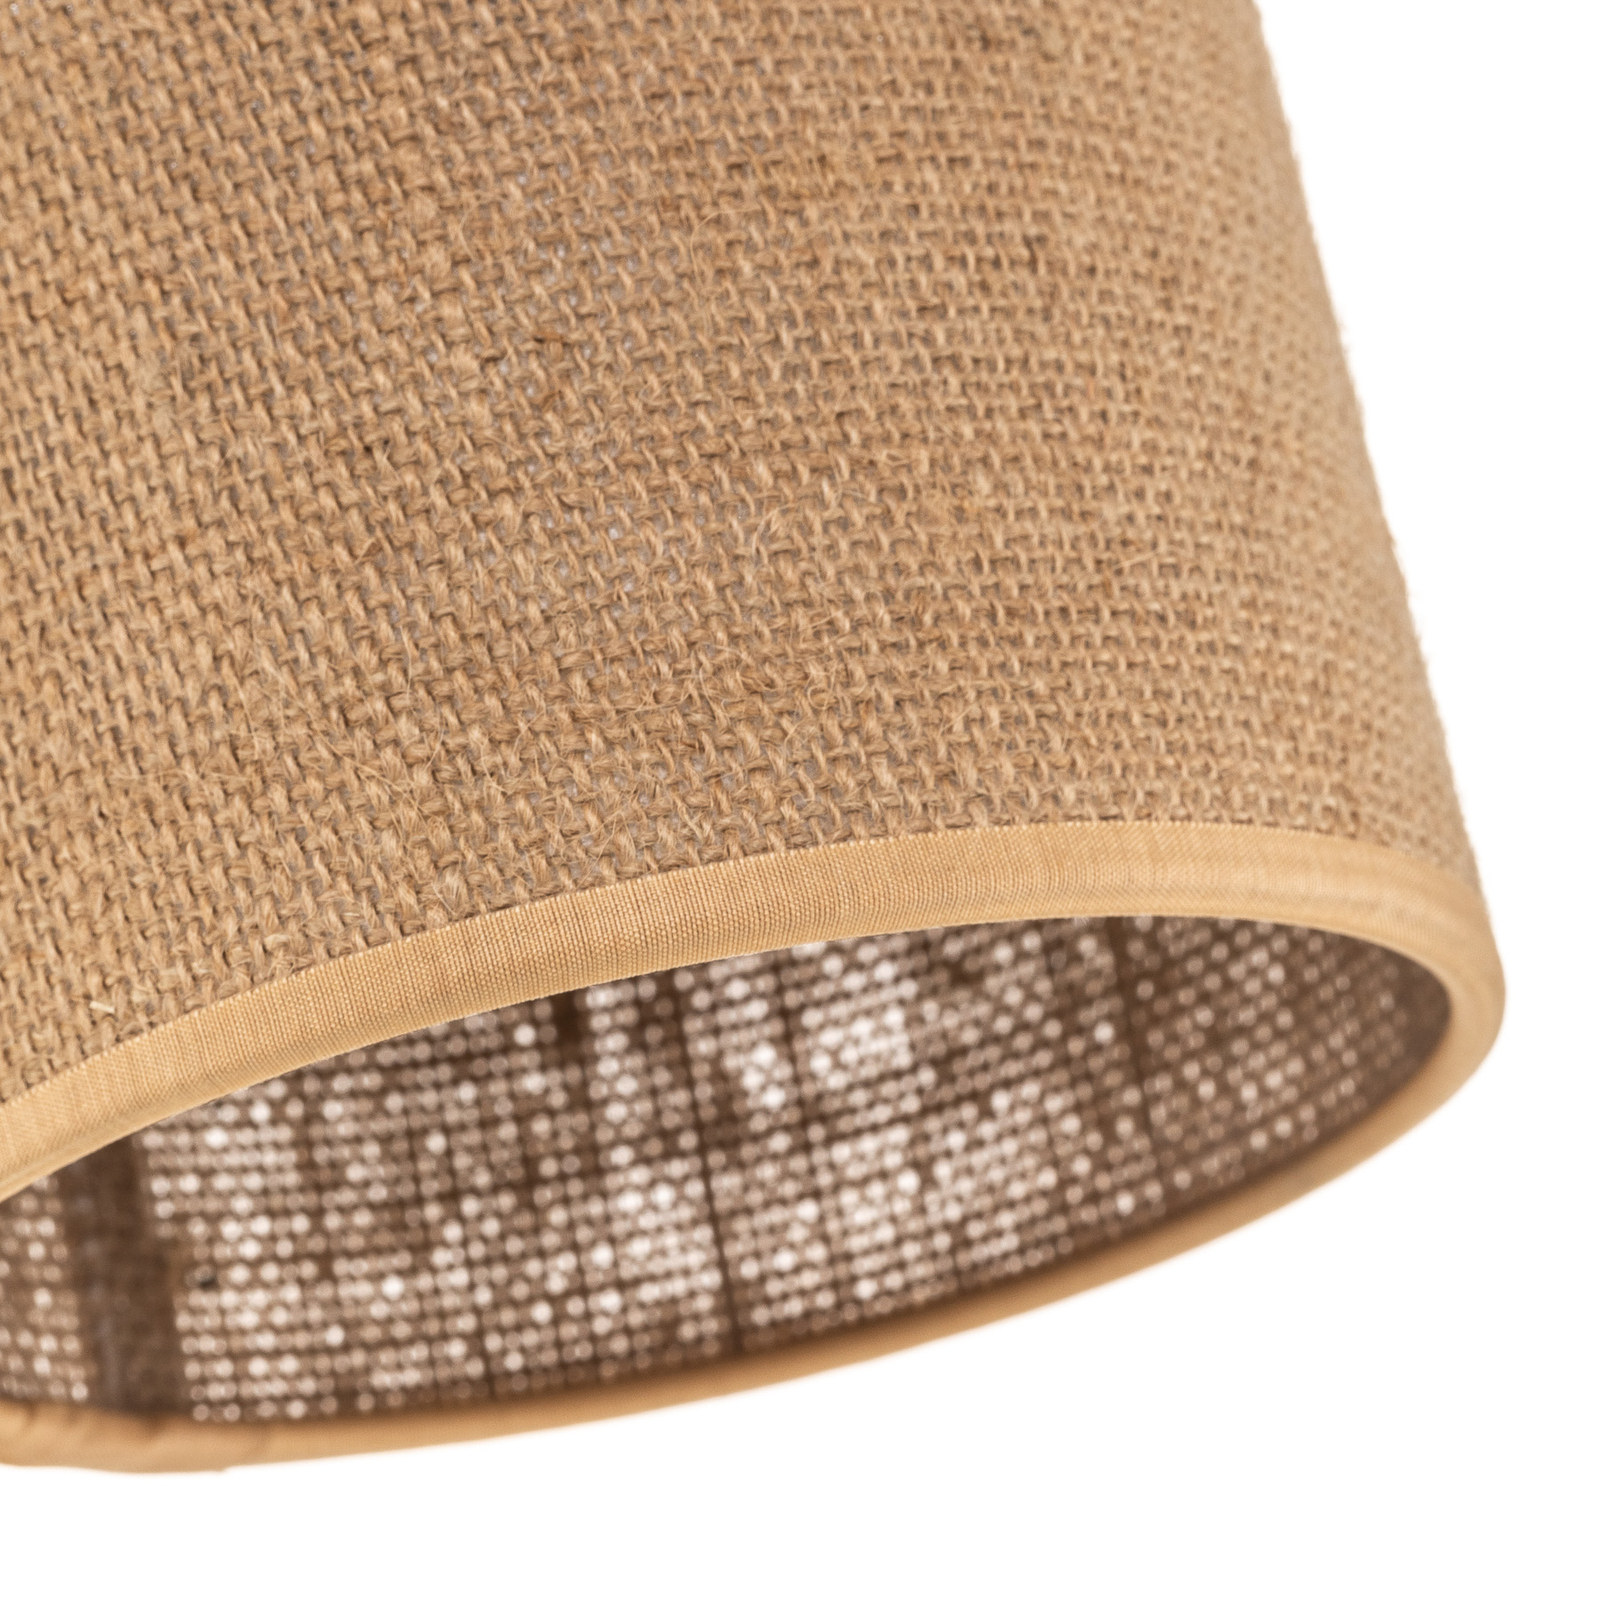 Jute ceiling light with three fabric lampshades